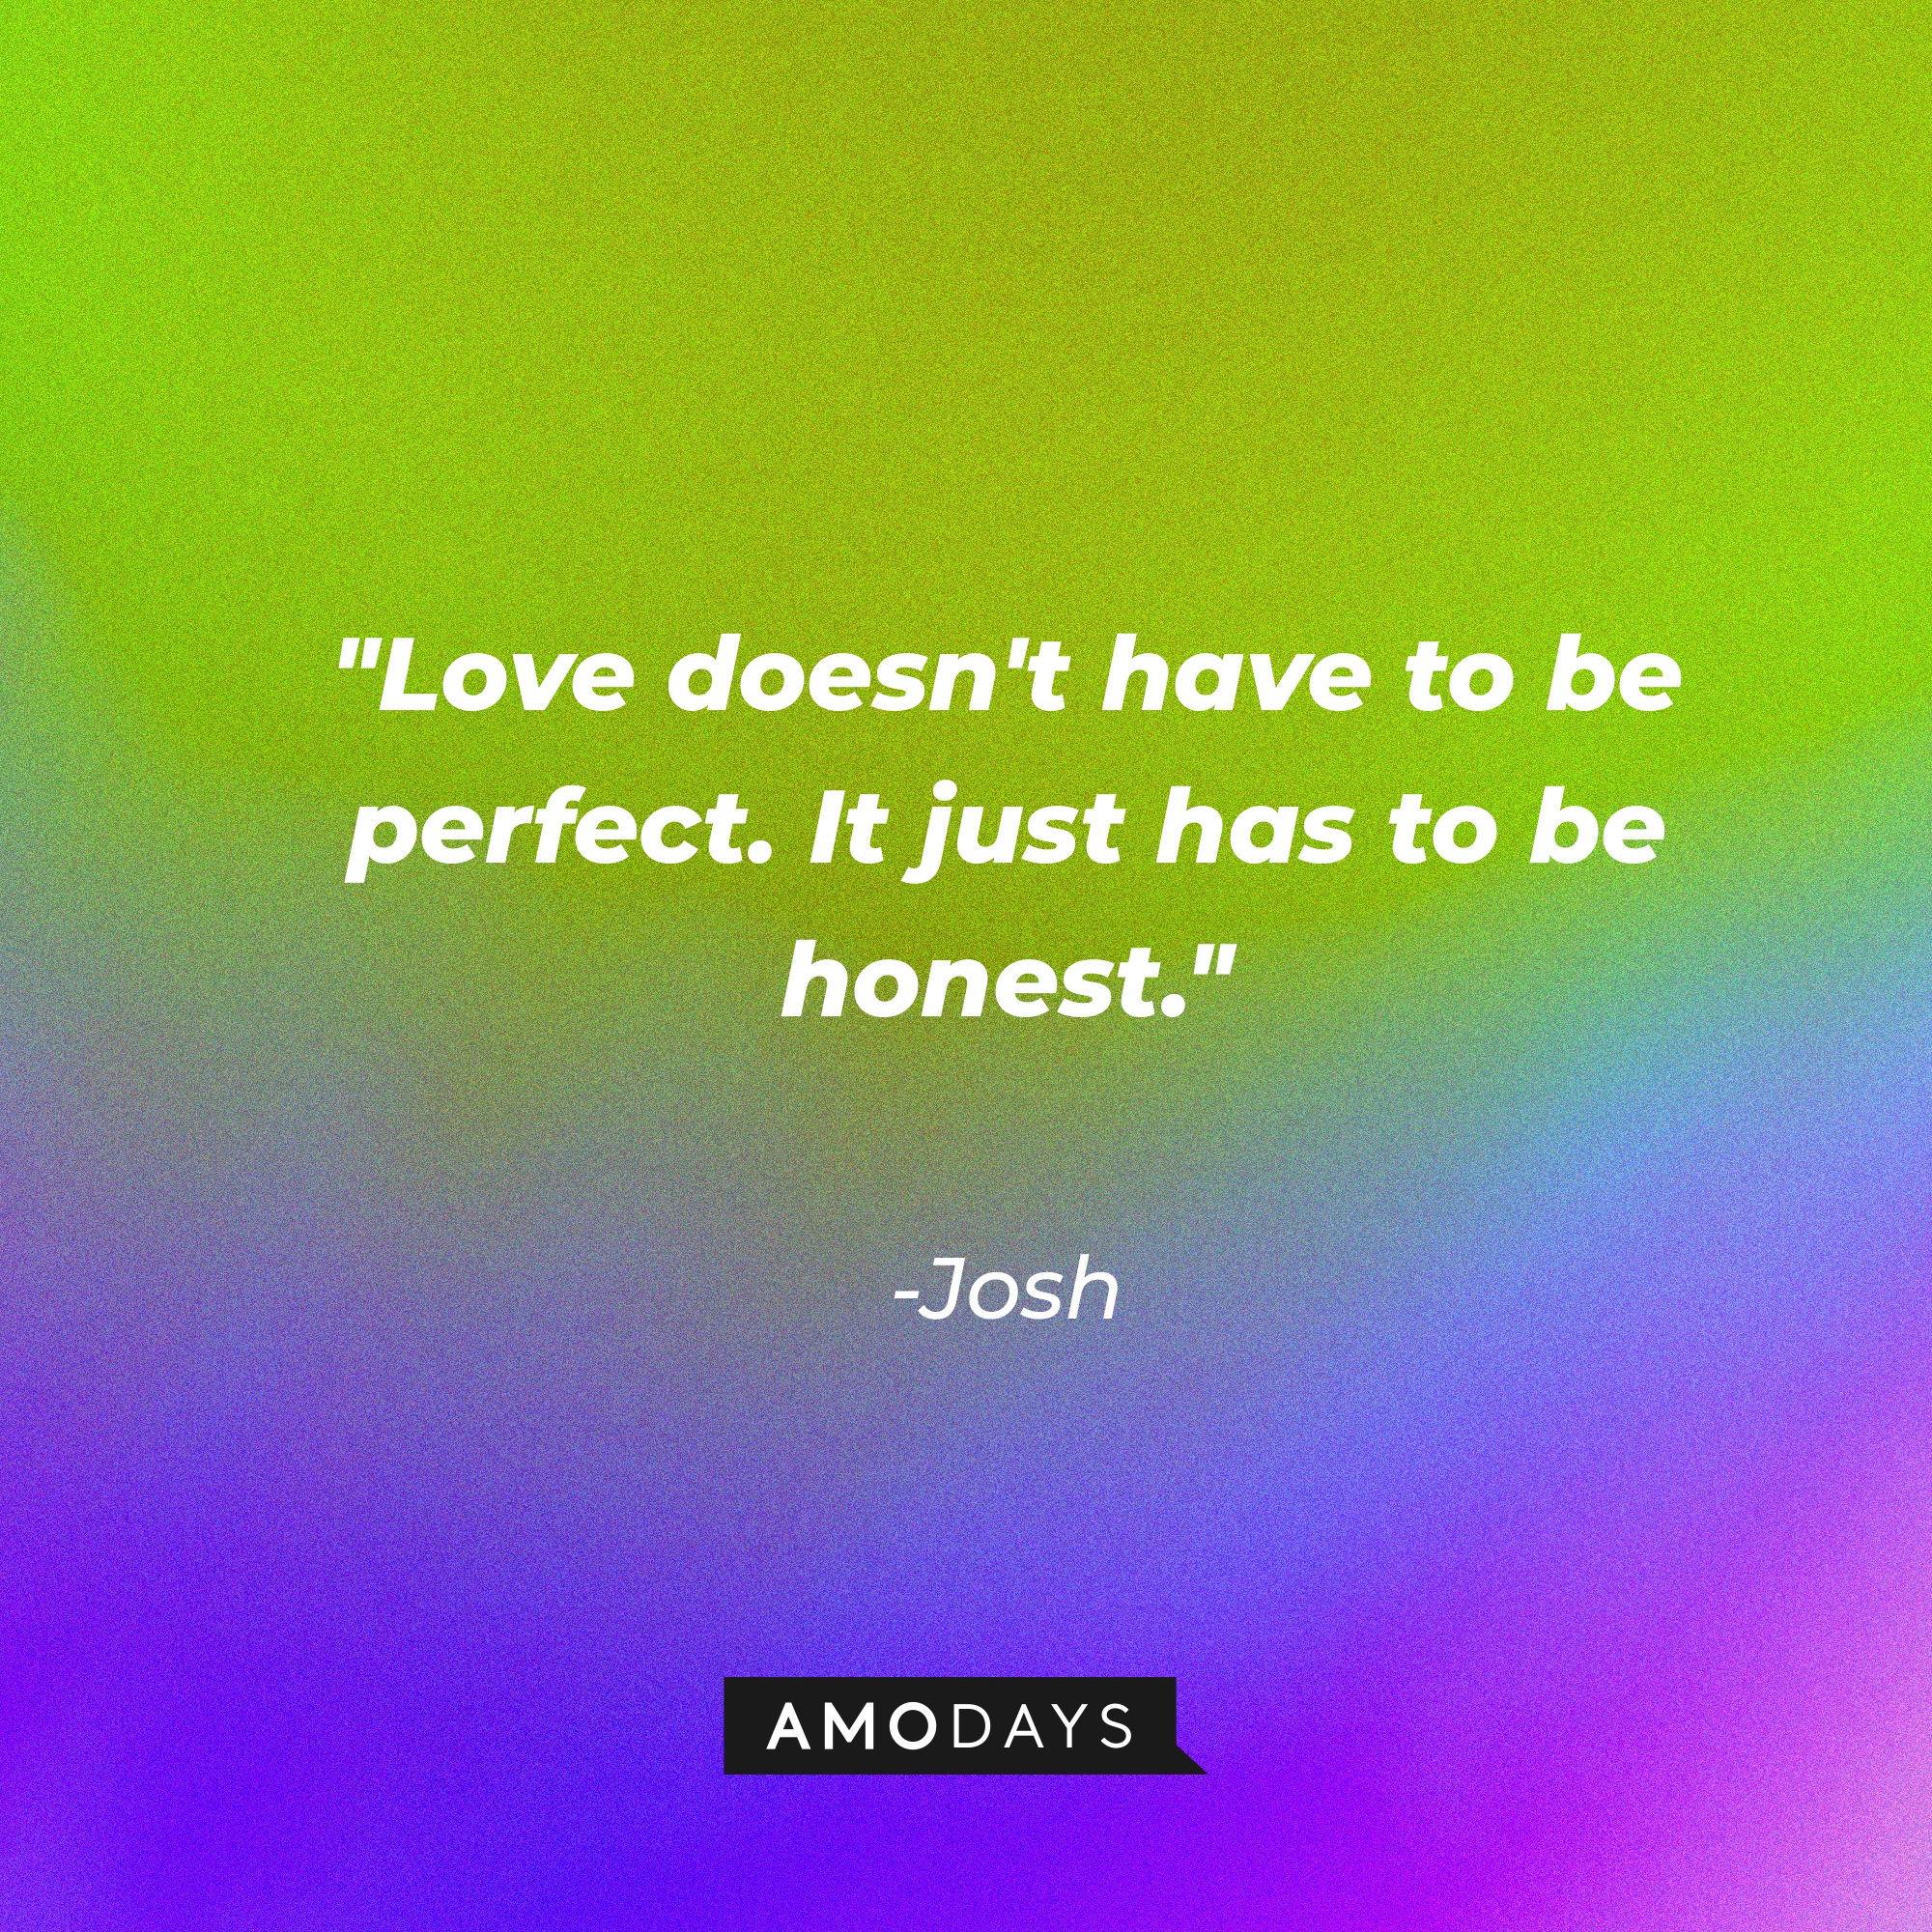 Josh’s quote: “Love doesn't have to be perfect. It just has to be honest." | Source: AmoDays